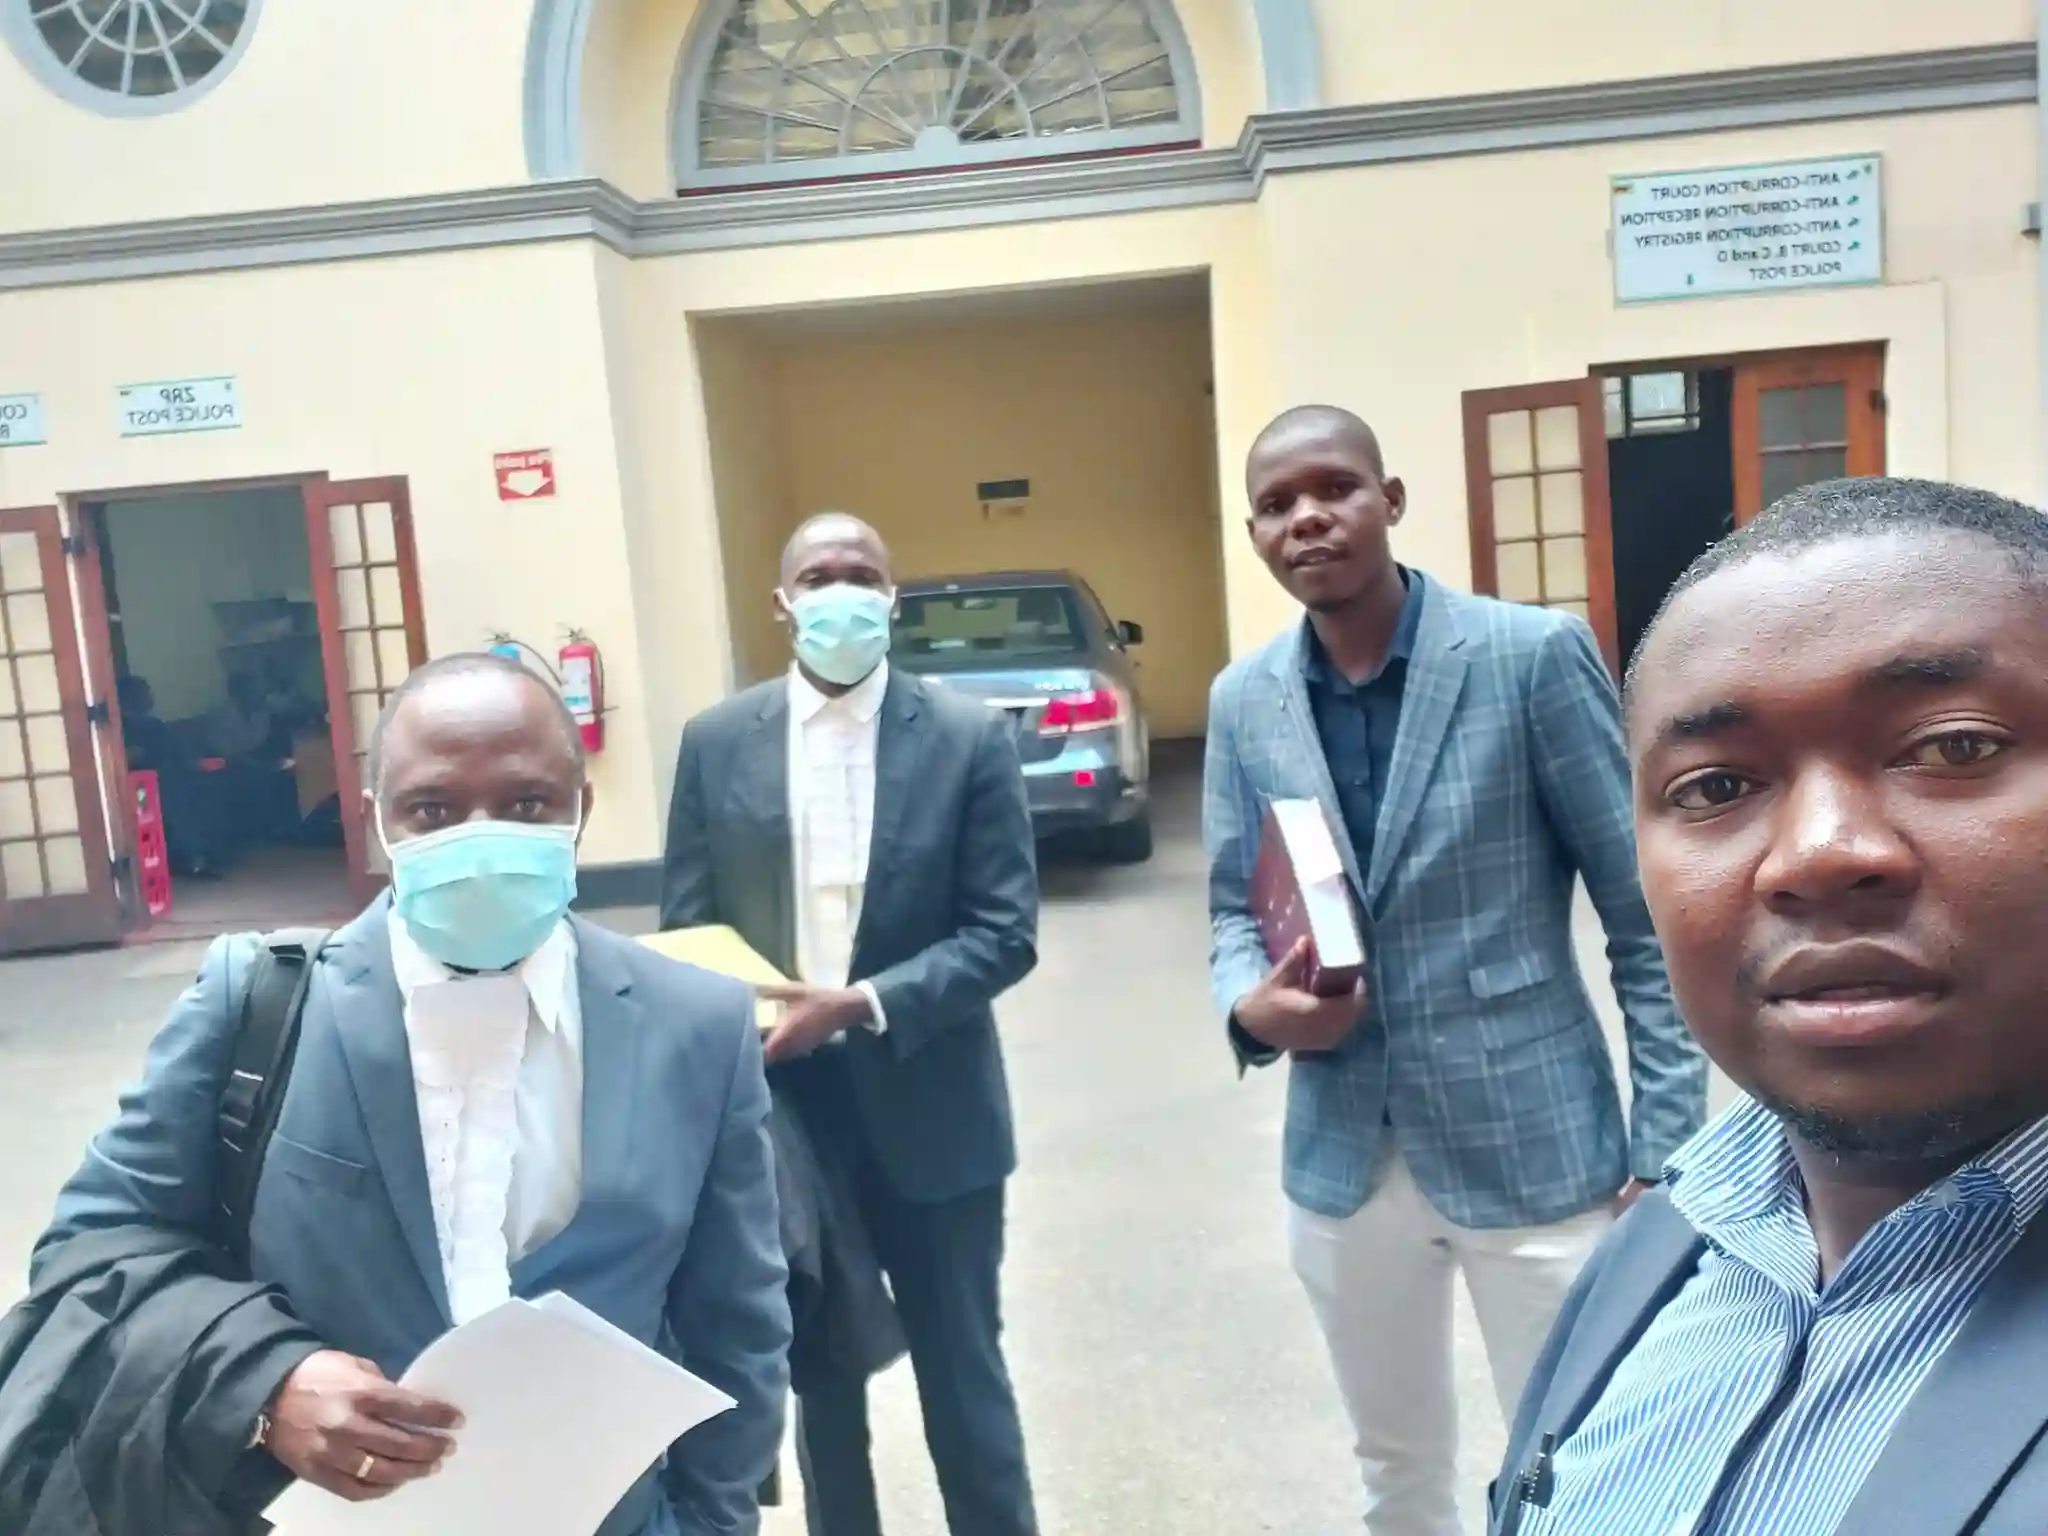 FULL TEXT: Zim Doctors Haul Govt To Court Over Deplorable Conditions At Quarantine & Isolation Centers